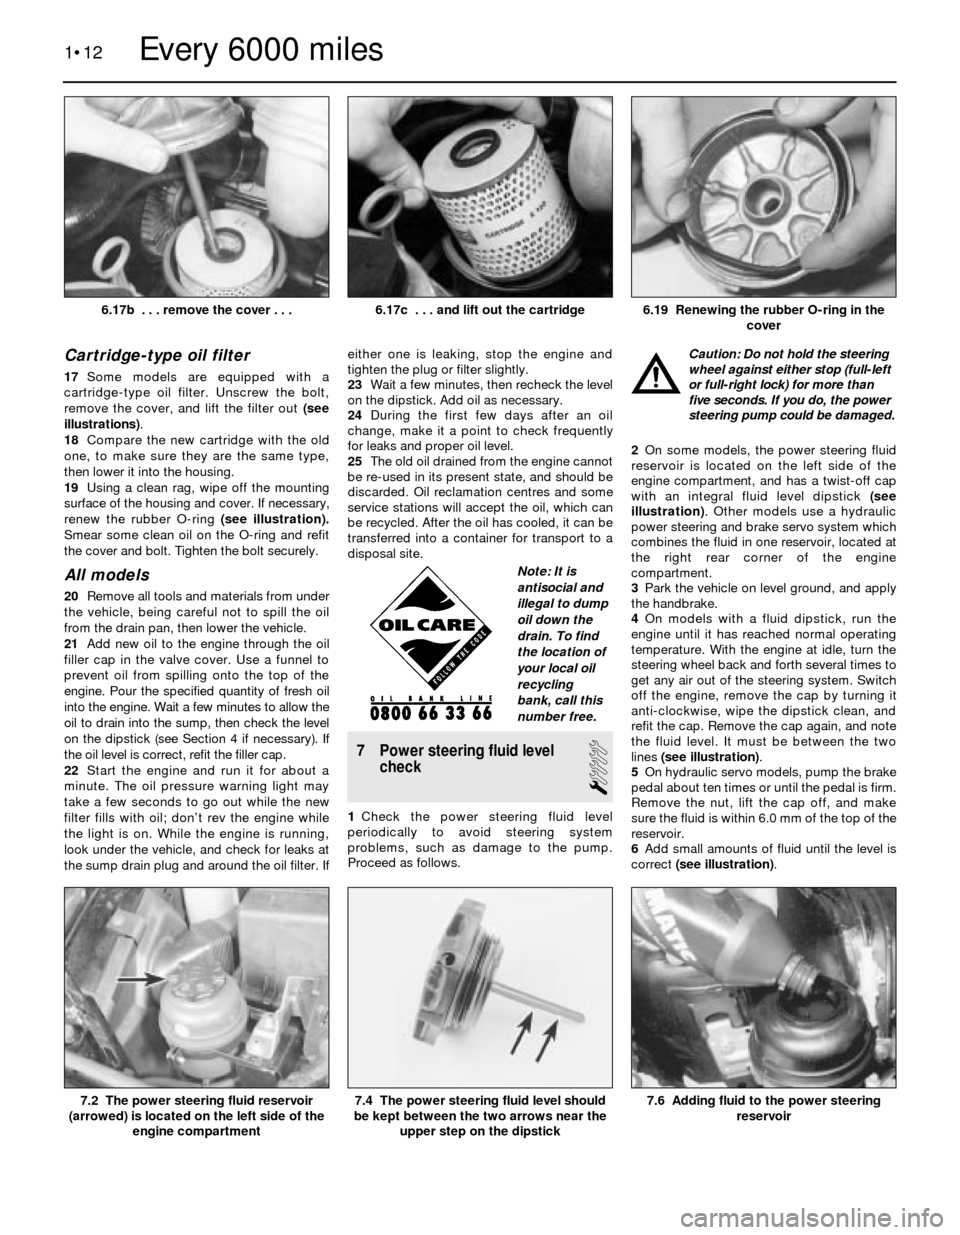 BMW 5 SERIES 1991 E34 Workshop Manual Cartridge-type oil filter
17Some models are equipped with a
cartridge-type oil filter. Unscrew the bolt,
remove the cover, and lift the filter out (see
illustrations).
18Compare the new cartridge with